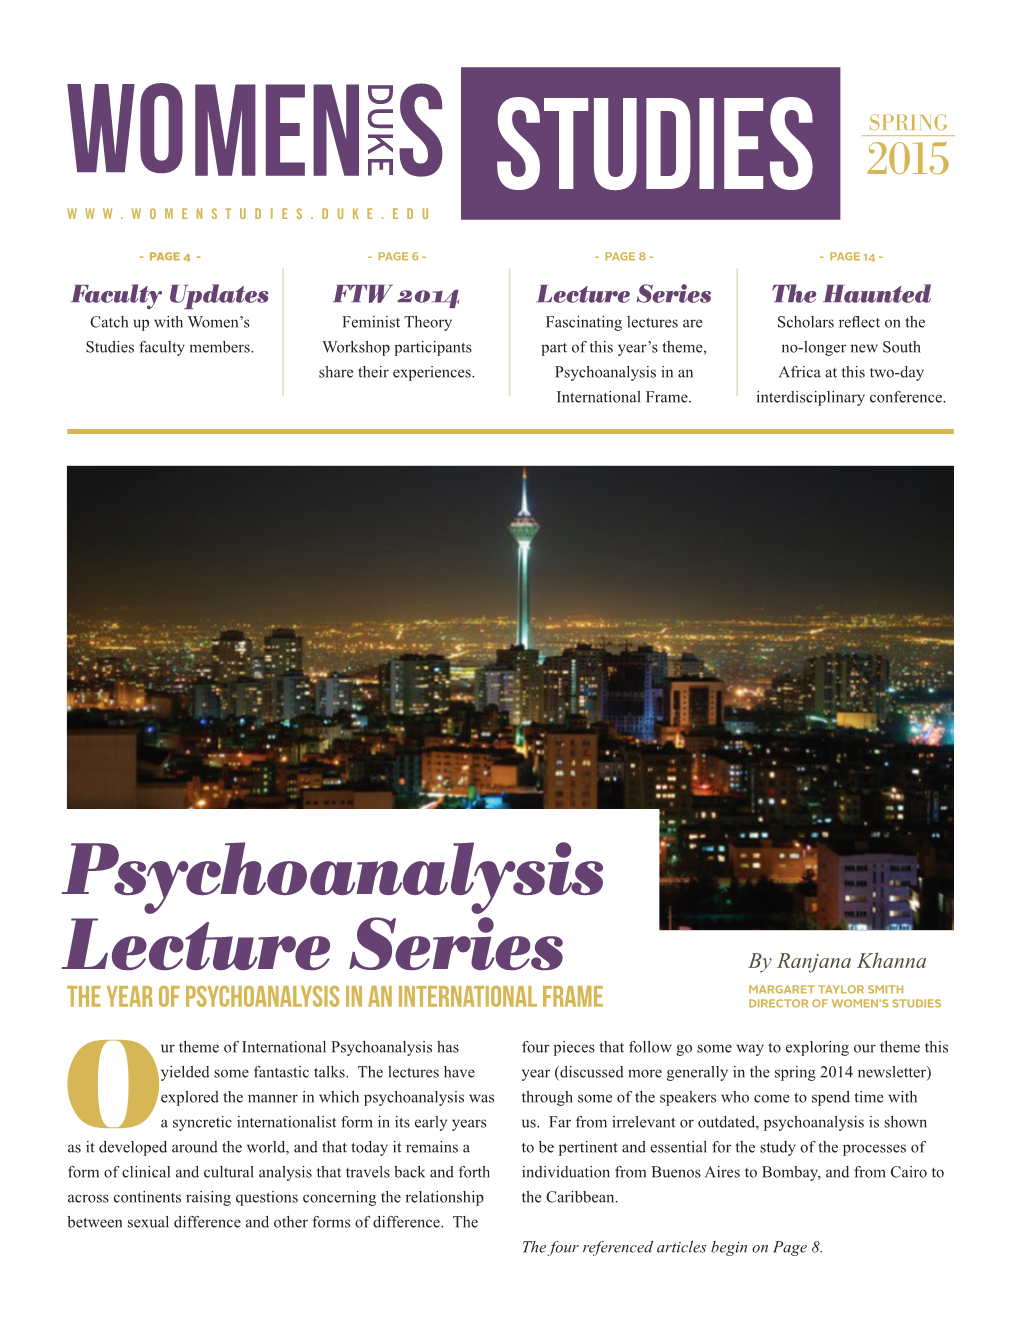 Psychoanalysis Lecture Series by Ranjana Khanna MARGARET TAYLOR SMITH the Year of Psychoanalysis in an International Frame DIRECTOR of WOMEN’S STUDIES